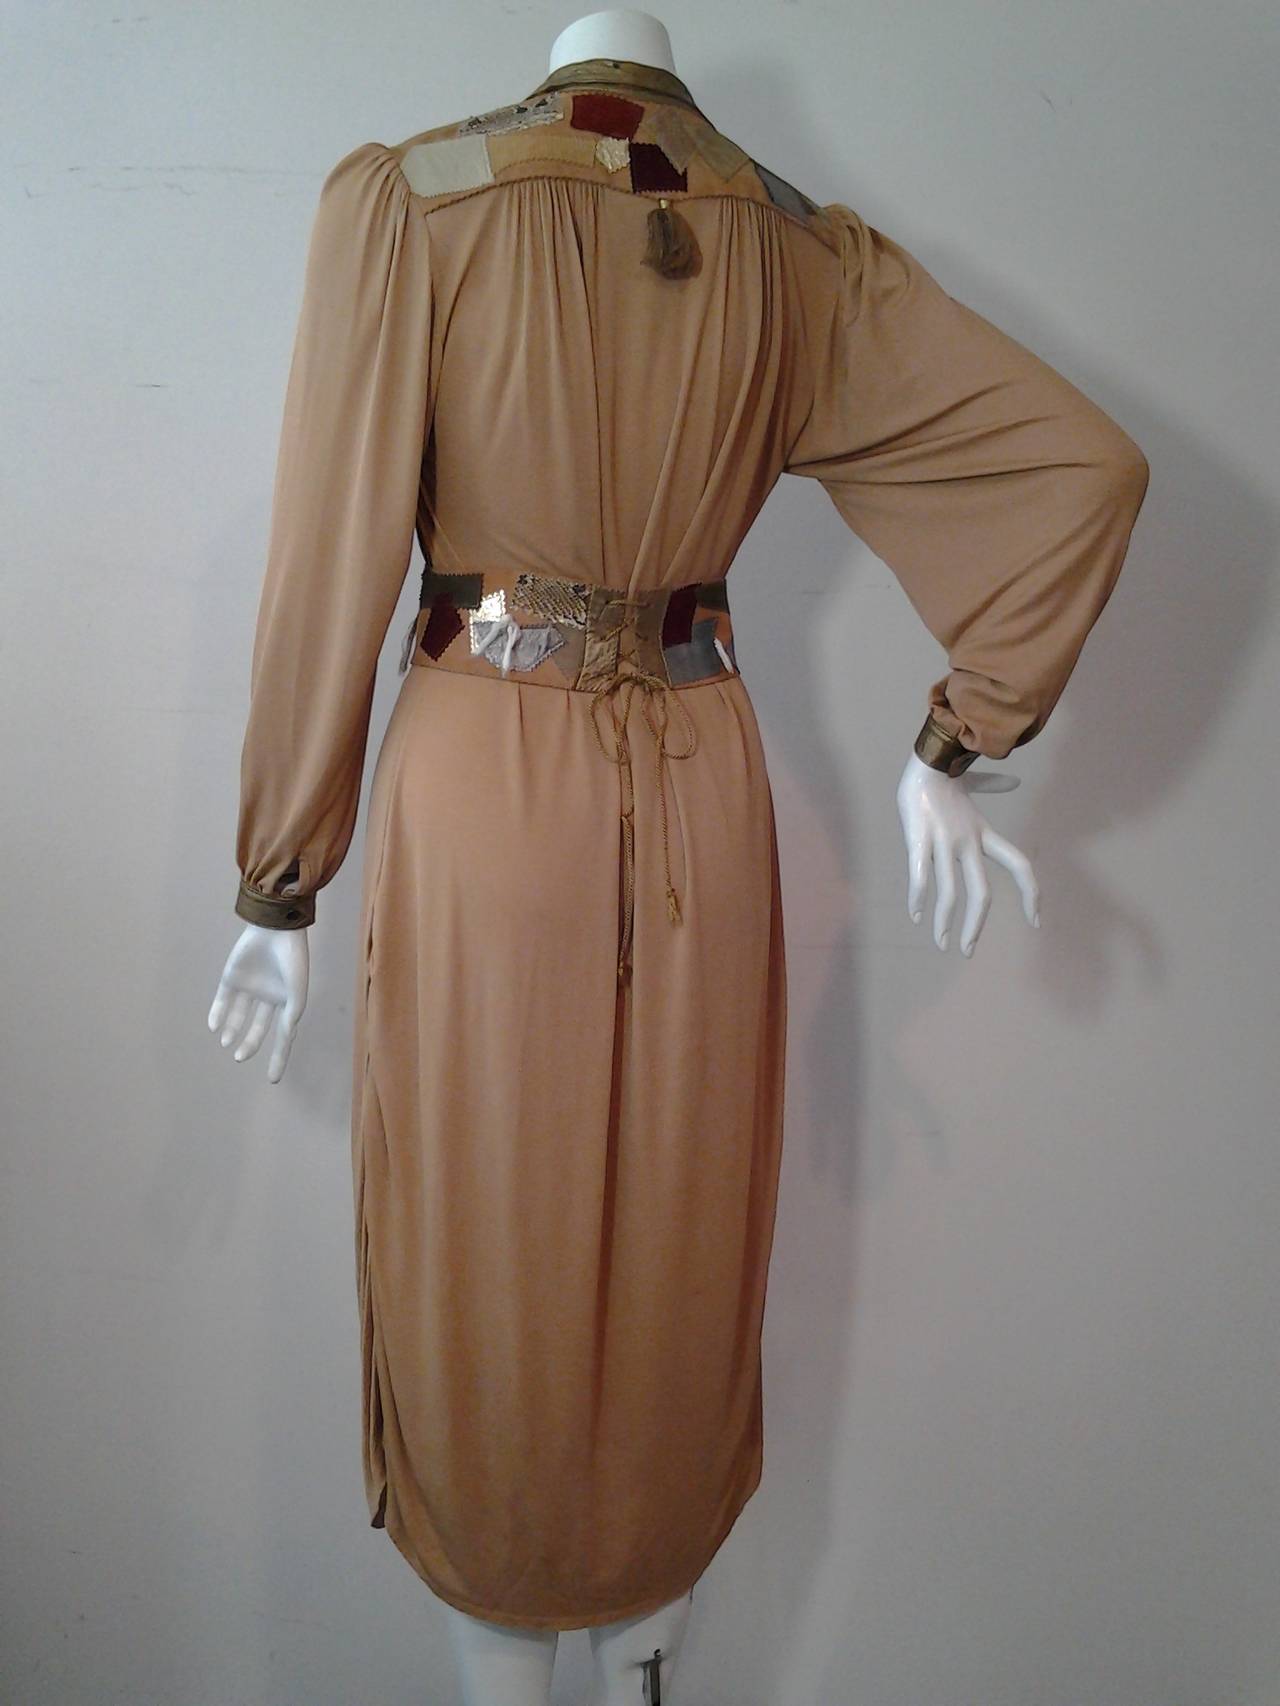 A 1970s terra cotta color matte jersey chemise style dress with suede, metallic leather and snakeskin patchwork shoulder yolk, collar, cuffs and wide coordinating belt with lace up back and front clasp lock.